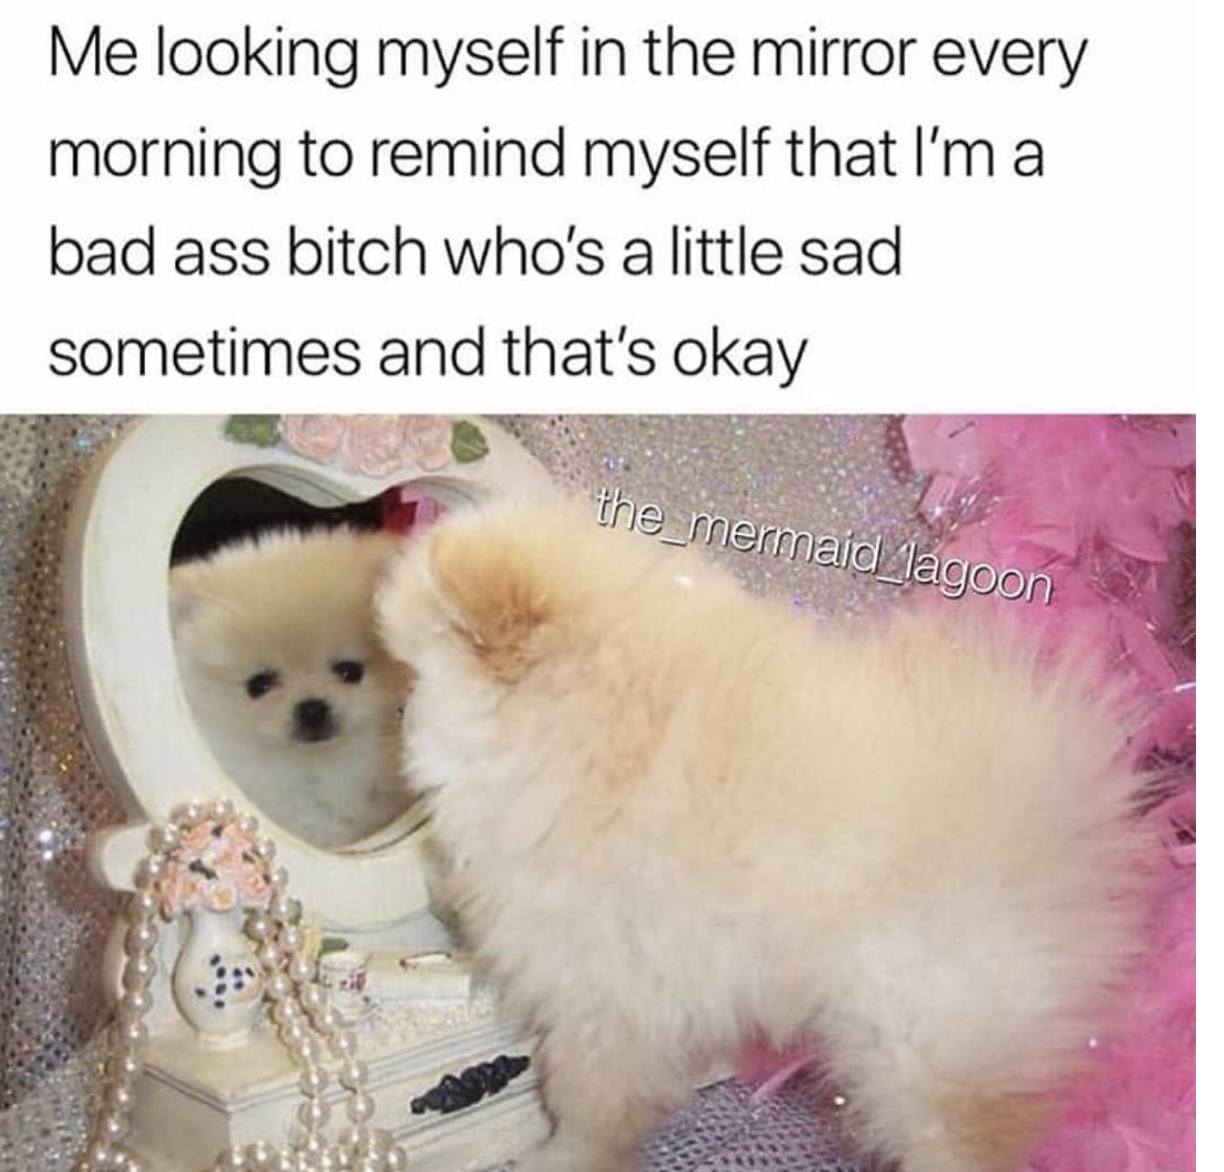 depression memes - Me looking myself in the mirror every morning to remind myself that I'm a bad ass bitch who's a little sad sometimes and that's okay the_mermaid lagoon